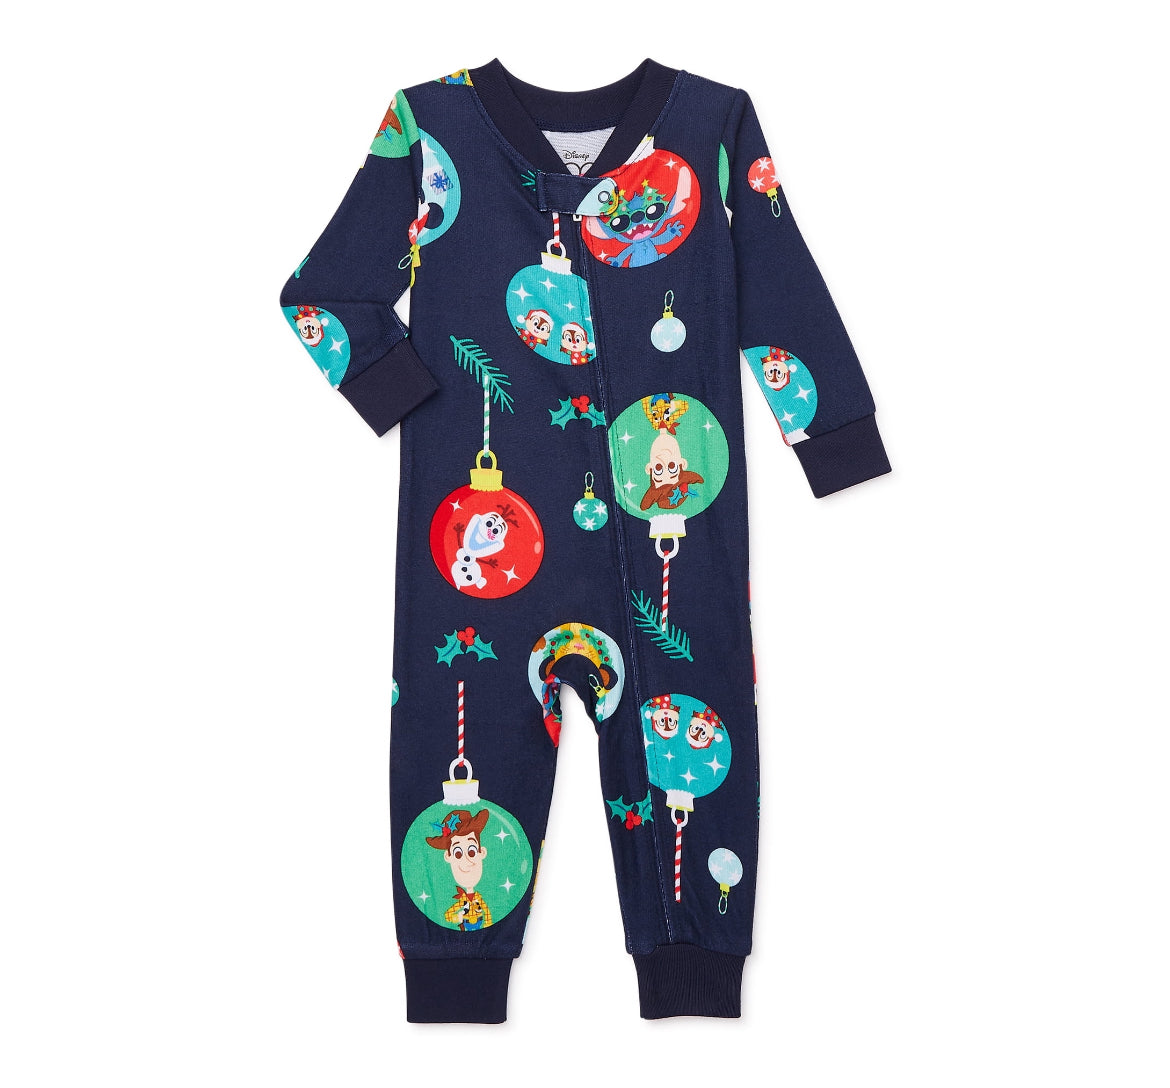 Disney’s 100th Anniversary Infant One-Piece Matching Family Pajamas